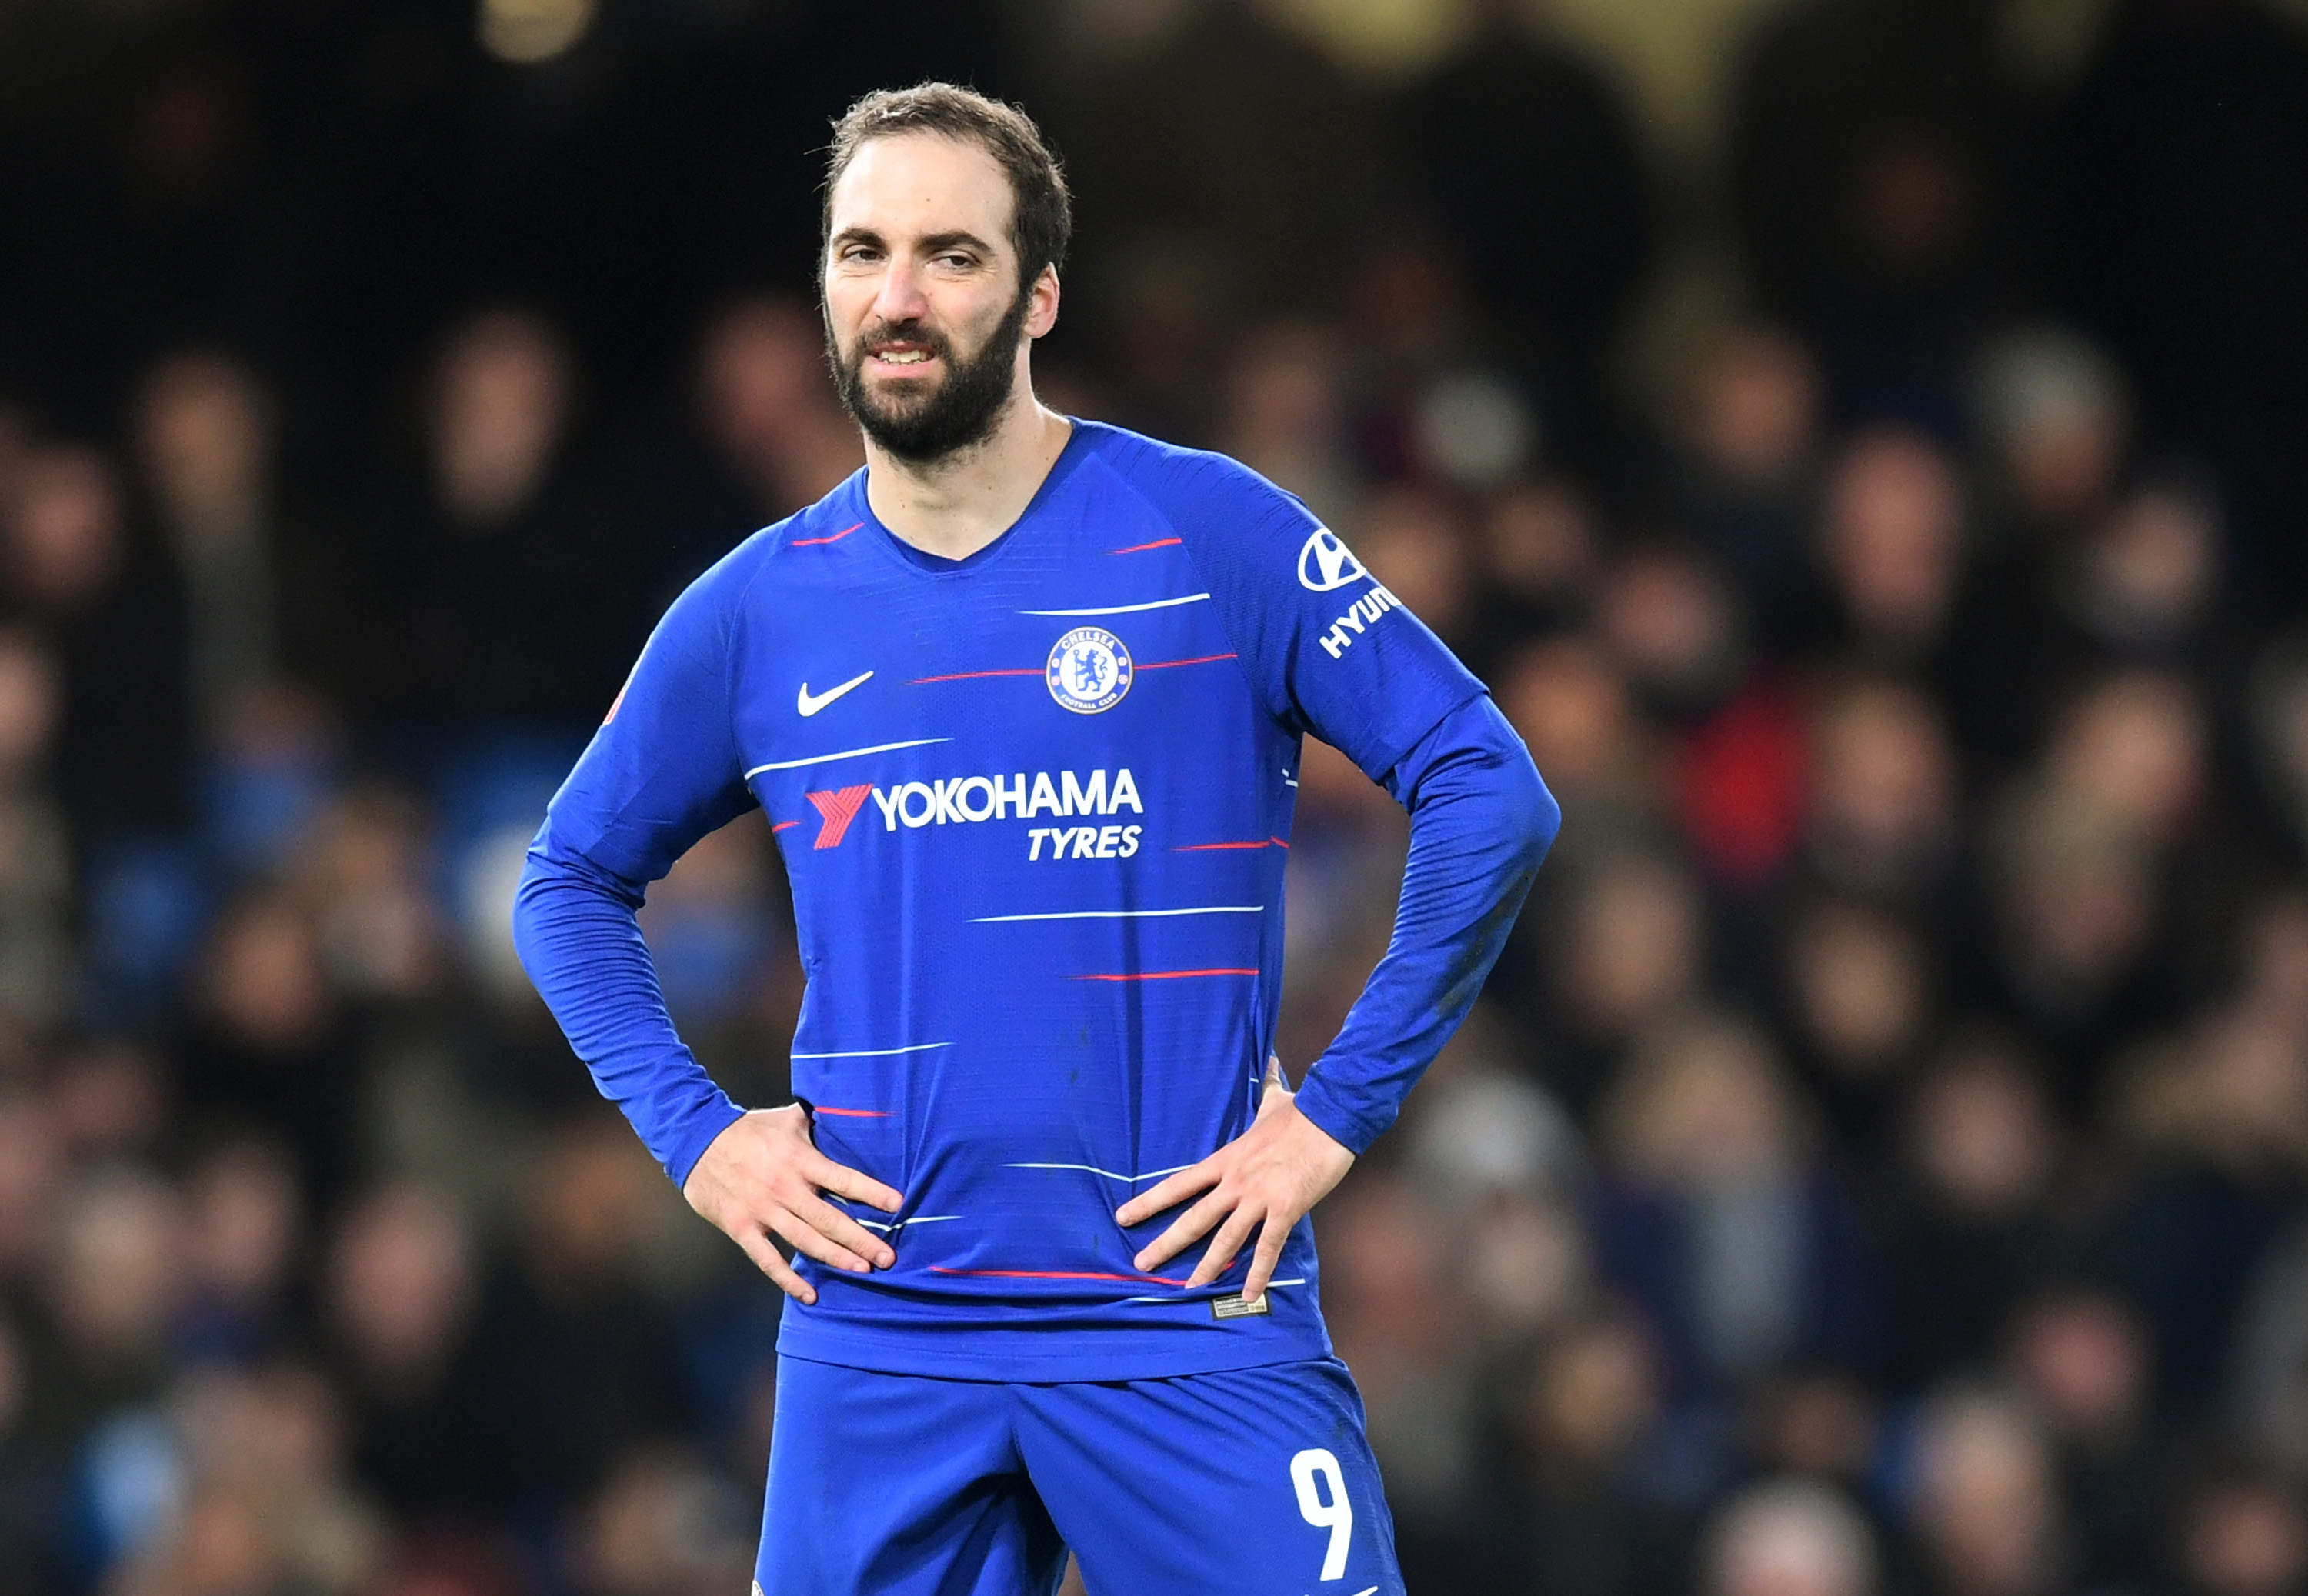 LONDON, ENGLAND - FEBRUARY 18:  Gonzalo Higuain of Chelsea looks on during the FA Cup Fifth Round match between Chelsea and Manchester United at Stamford Bridge on February 18, 2019 in London, United Kingdom. (Photo by Michael Regan/Getty Images)